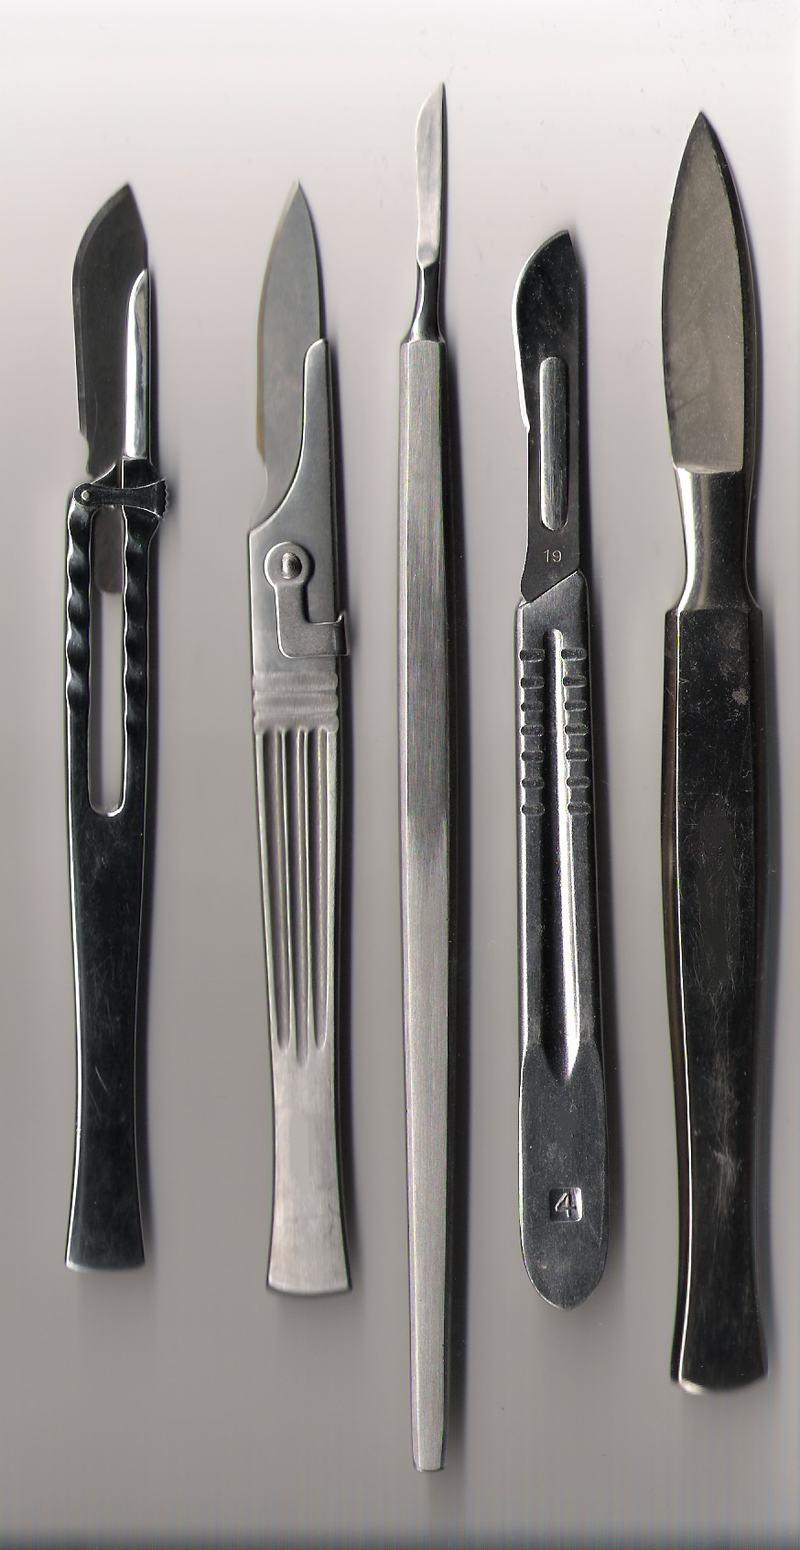 Surgical instrument - Wikipedia